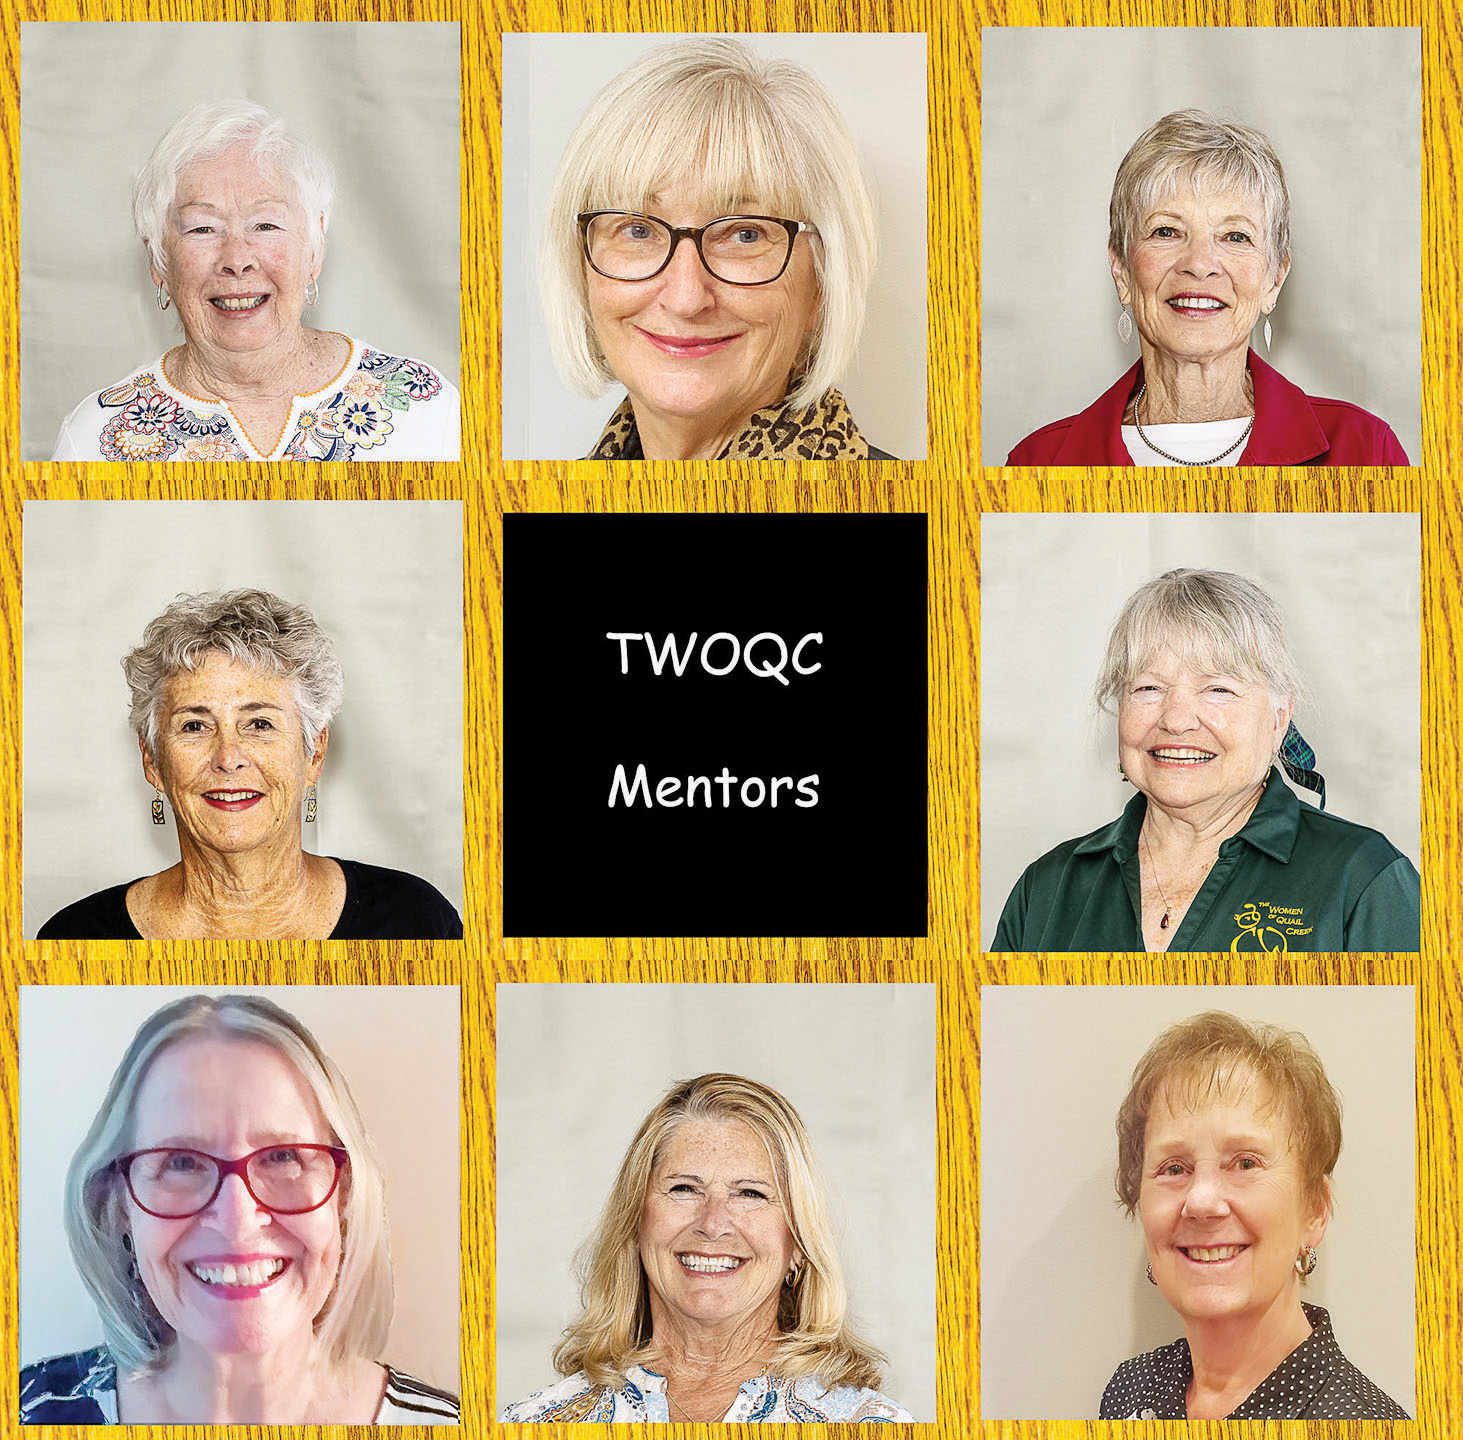 Top row (left to right): Clarice Sullivan, Patricia Fina Weaver, and Jeri Collins; middle row: Patty Zatkin and Suzan Bryceland; bottom row: Janice Pell, Sandi Beecher, and Chris Webber. All of the mentors look forward to the time when they can get together with their mentees, perhaps at lunch or at least for a cup of coffee. (Photo by Jim Burkstrand)